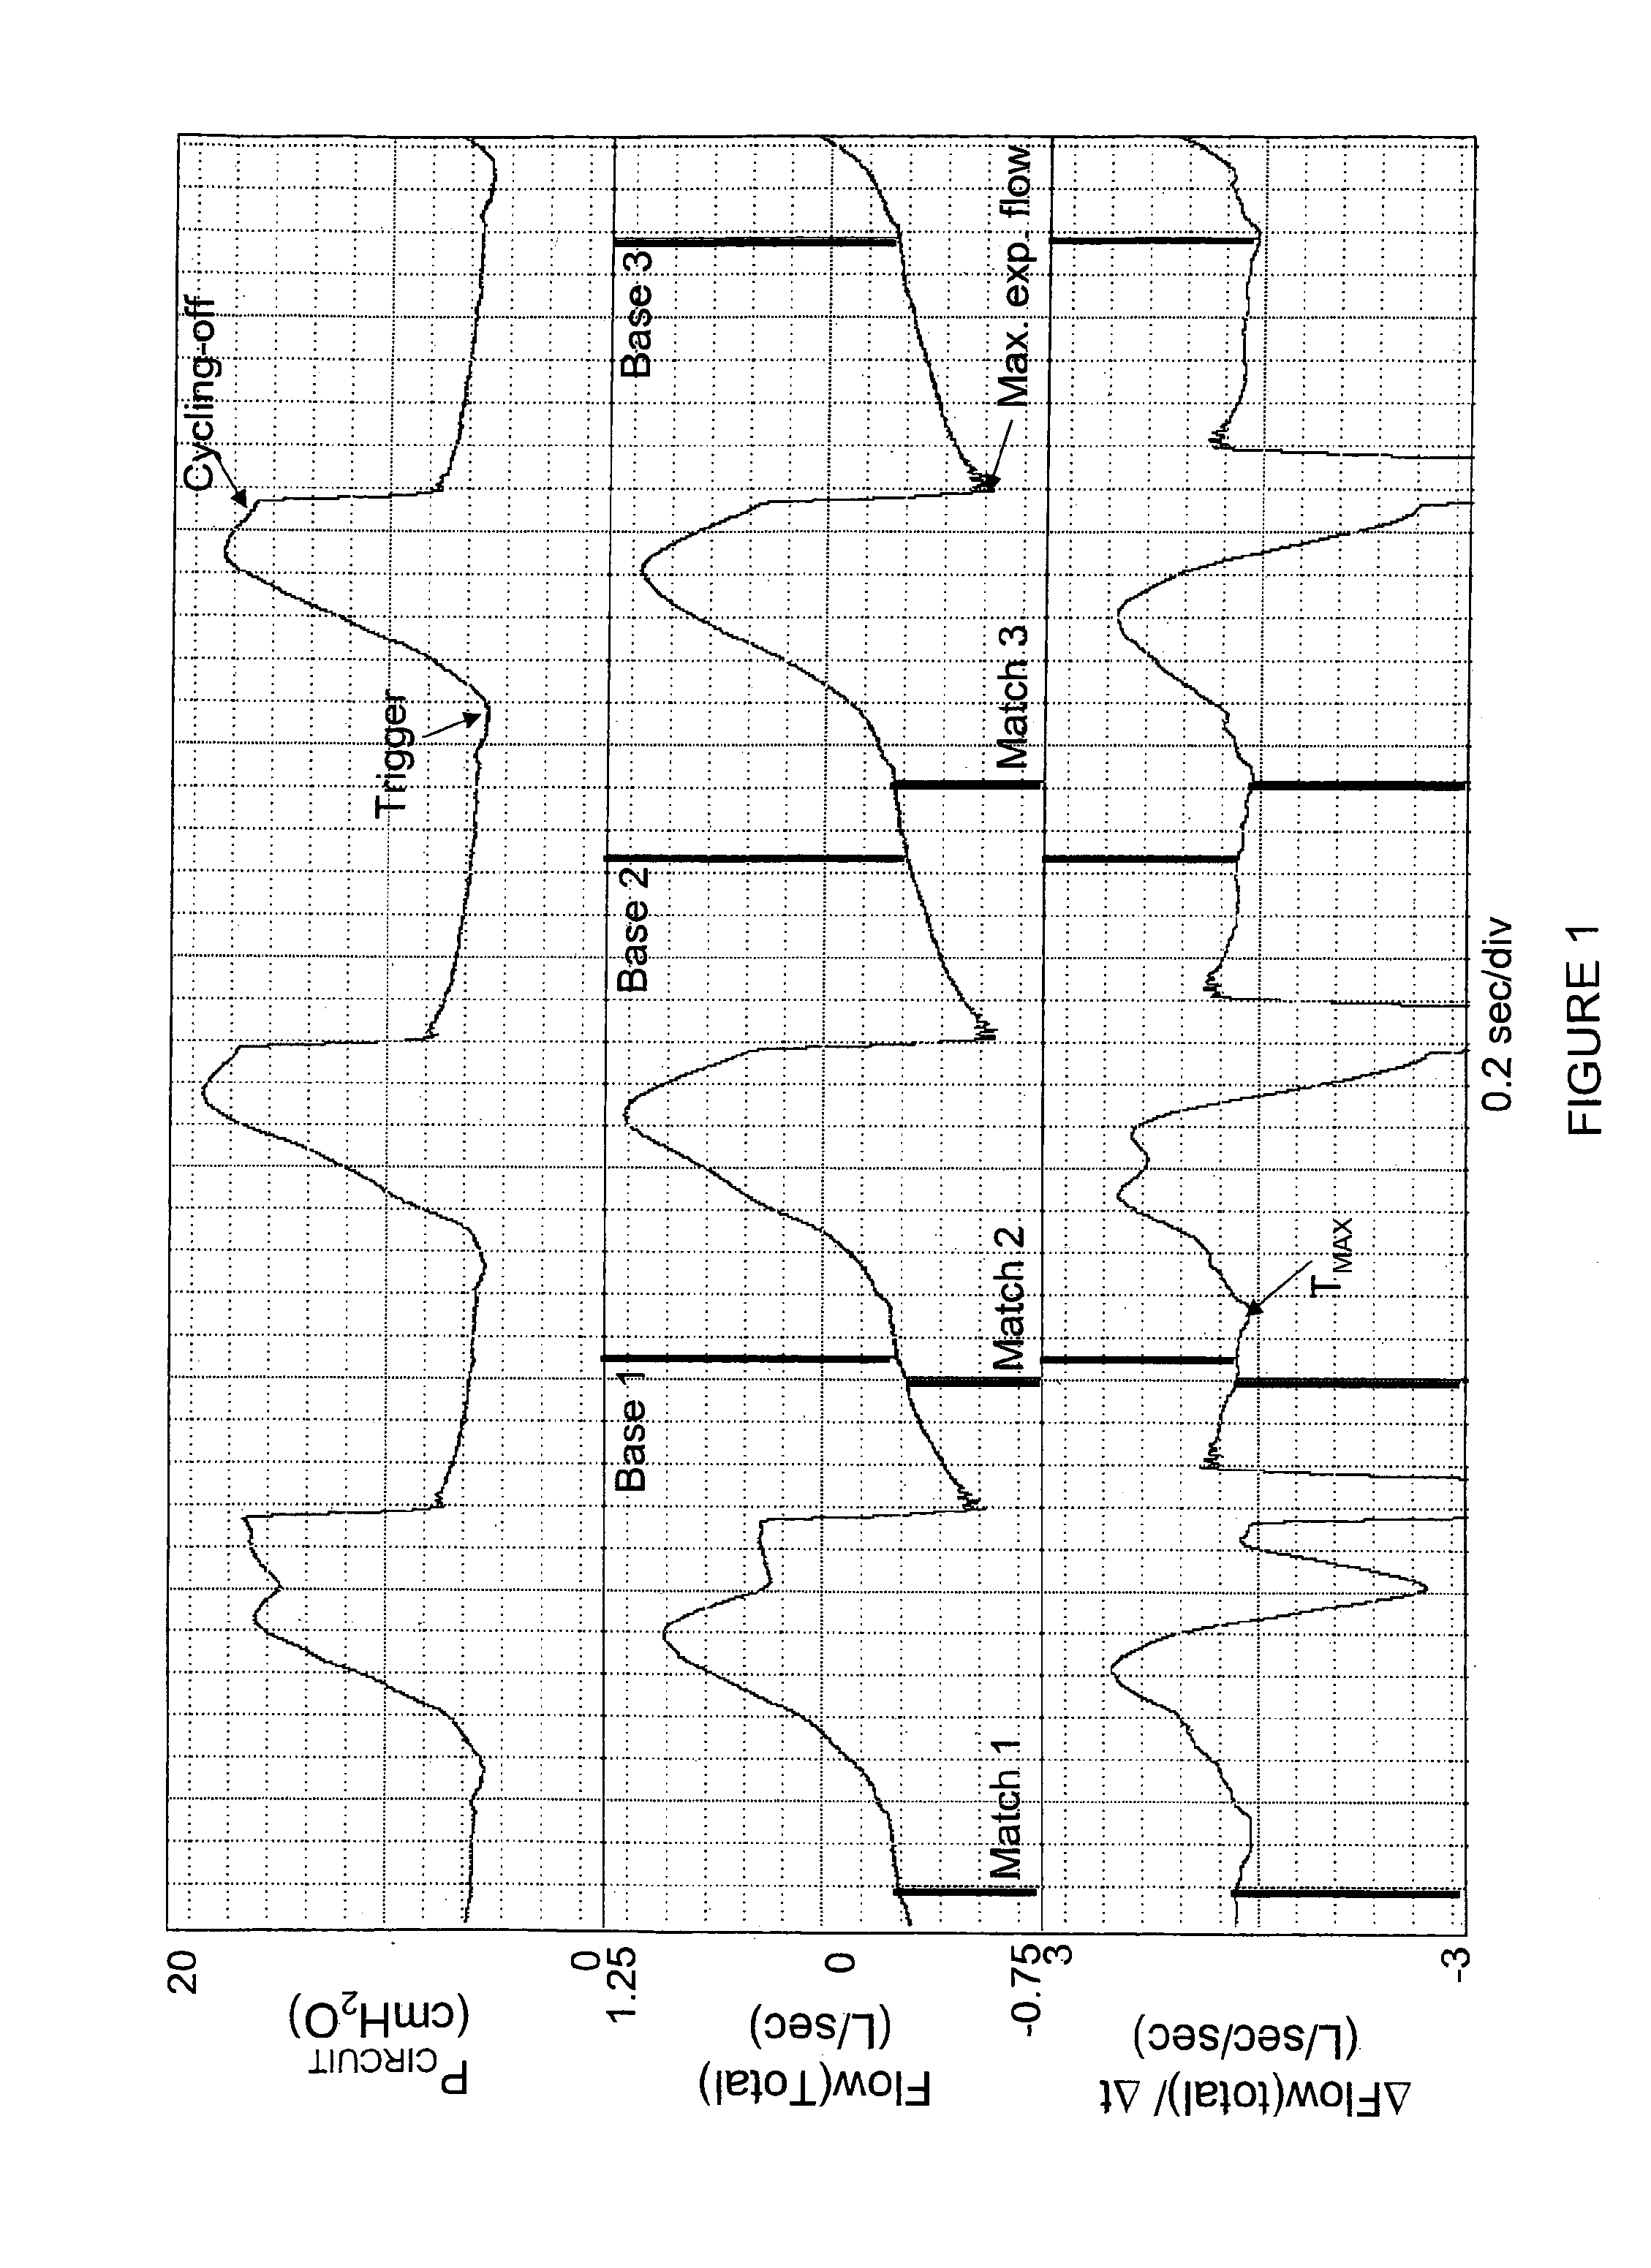 Method for estimating leaks from ventilator circuits